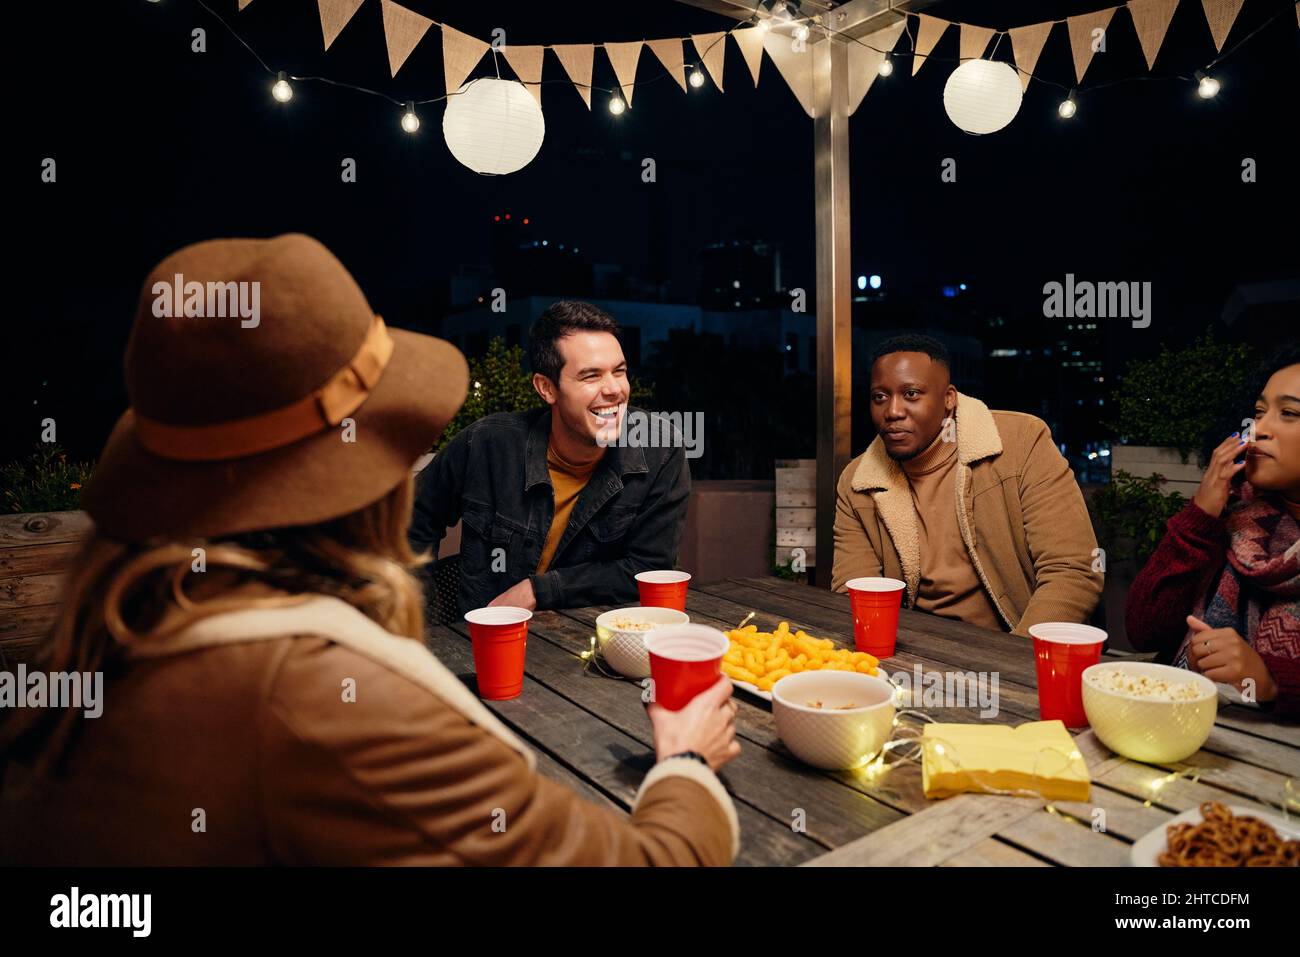 Multi-cultural group of young adult friends sitting around a table at a trendy rooftop party. Eating and drinking, having a good time Stock Photo